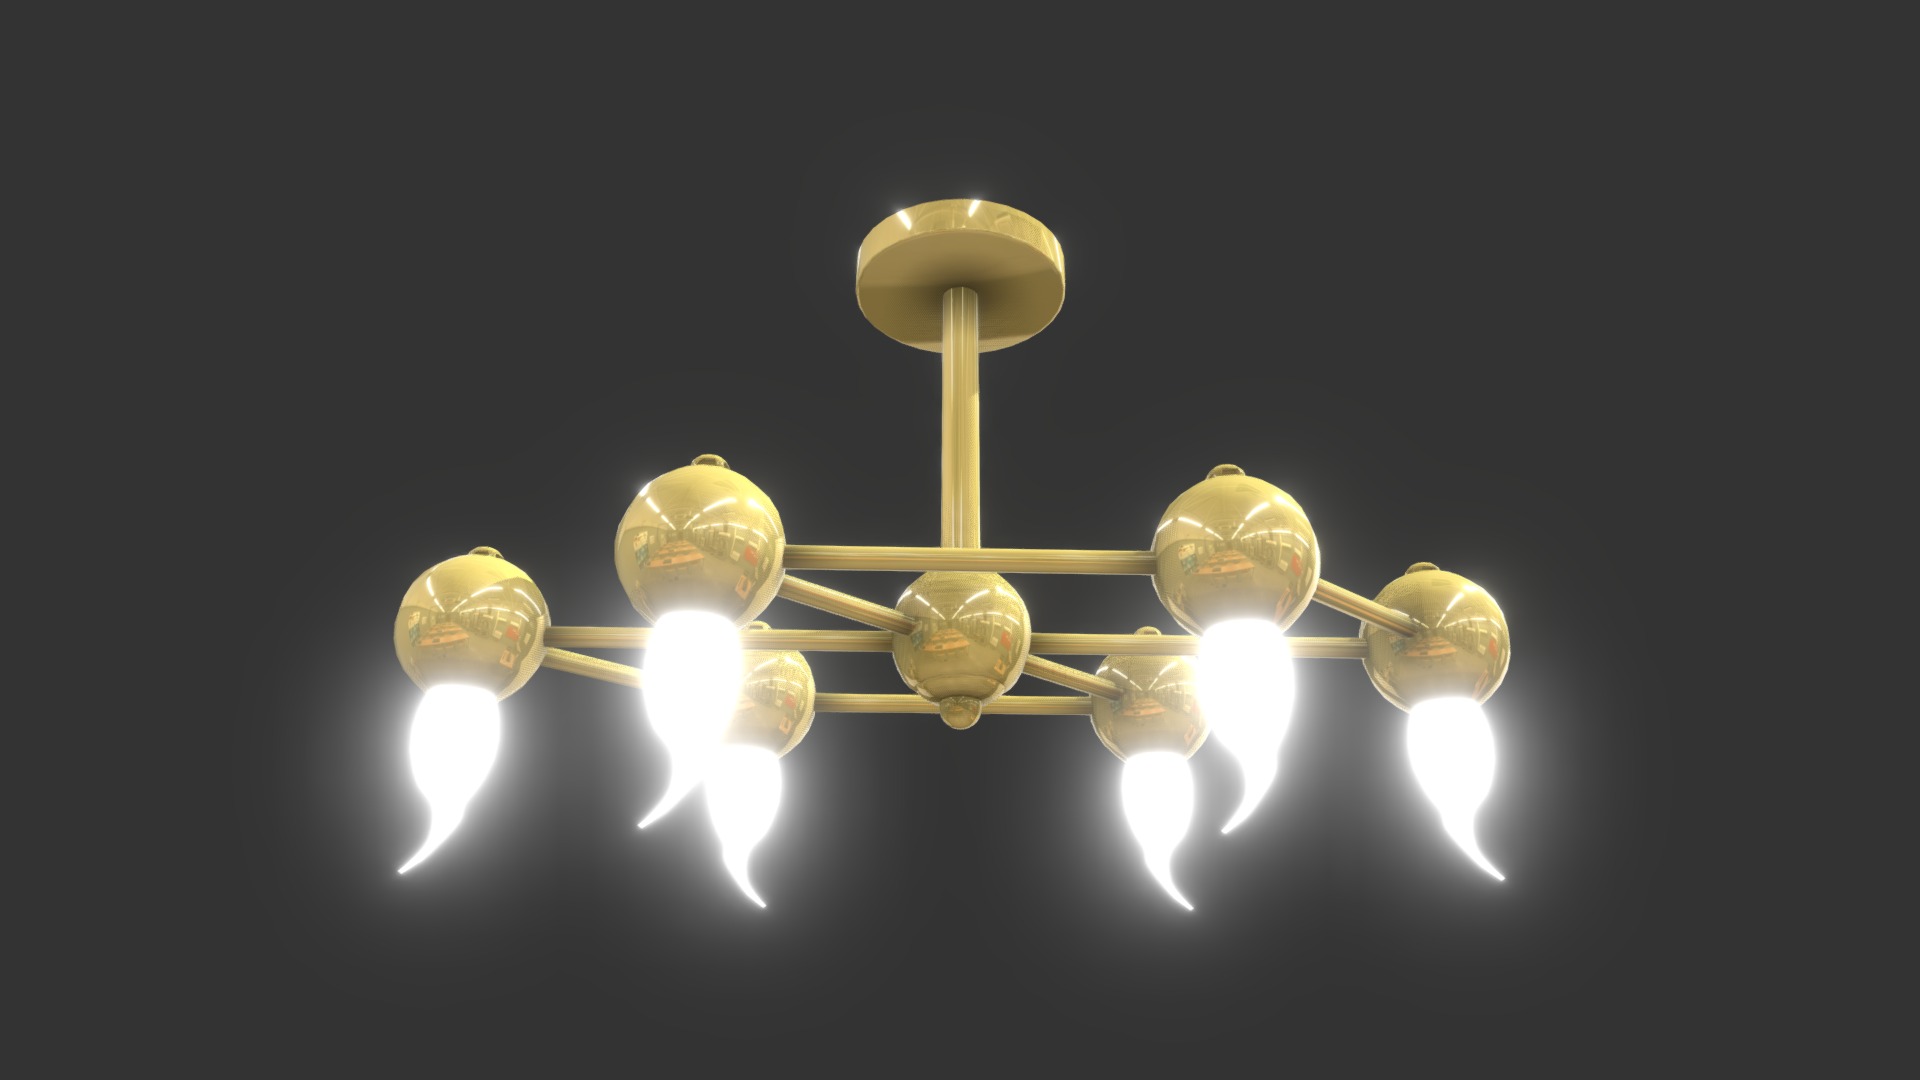 3D model HGP73-6 - This is a 3D model of the HGP73-6. The 3D model is about a chandelier with light bulbs.